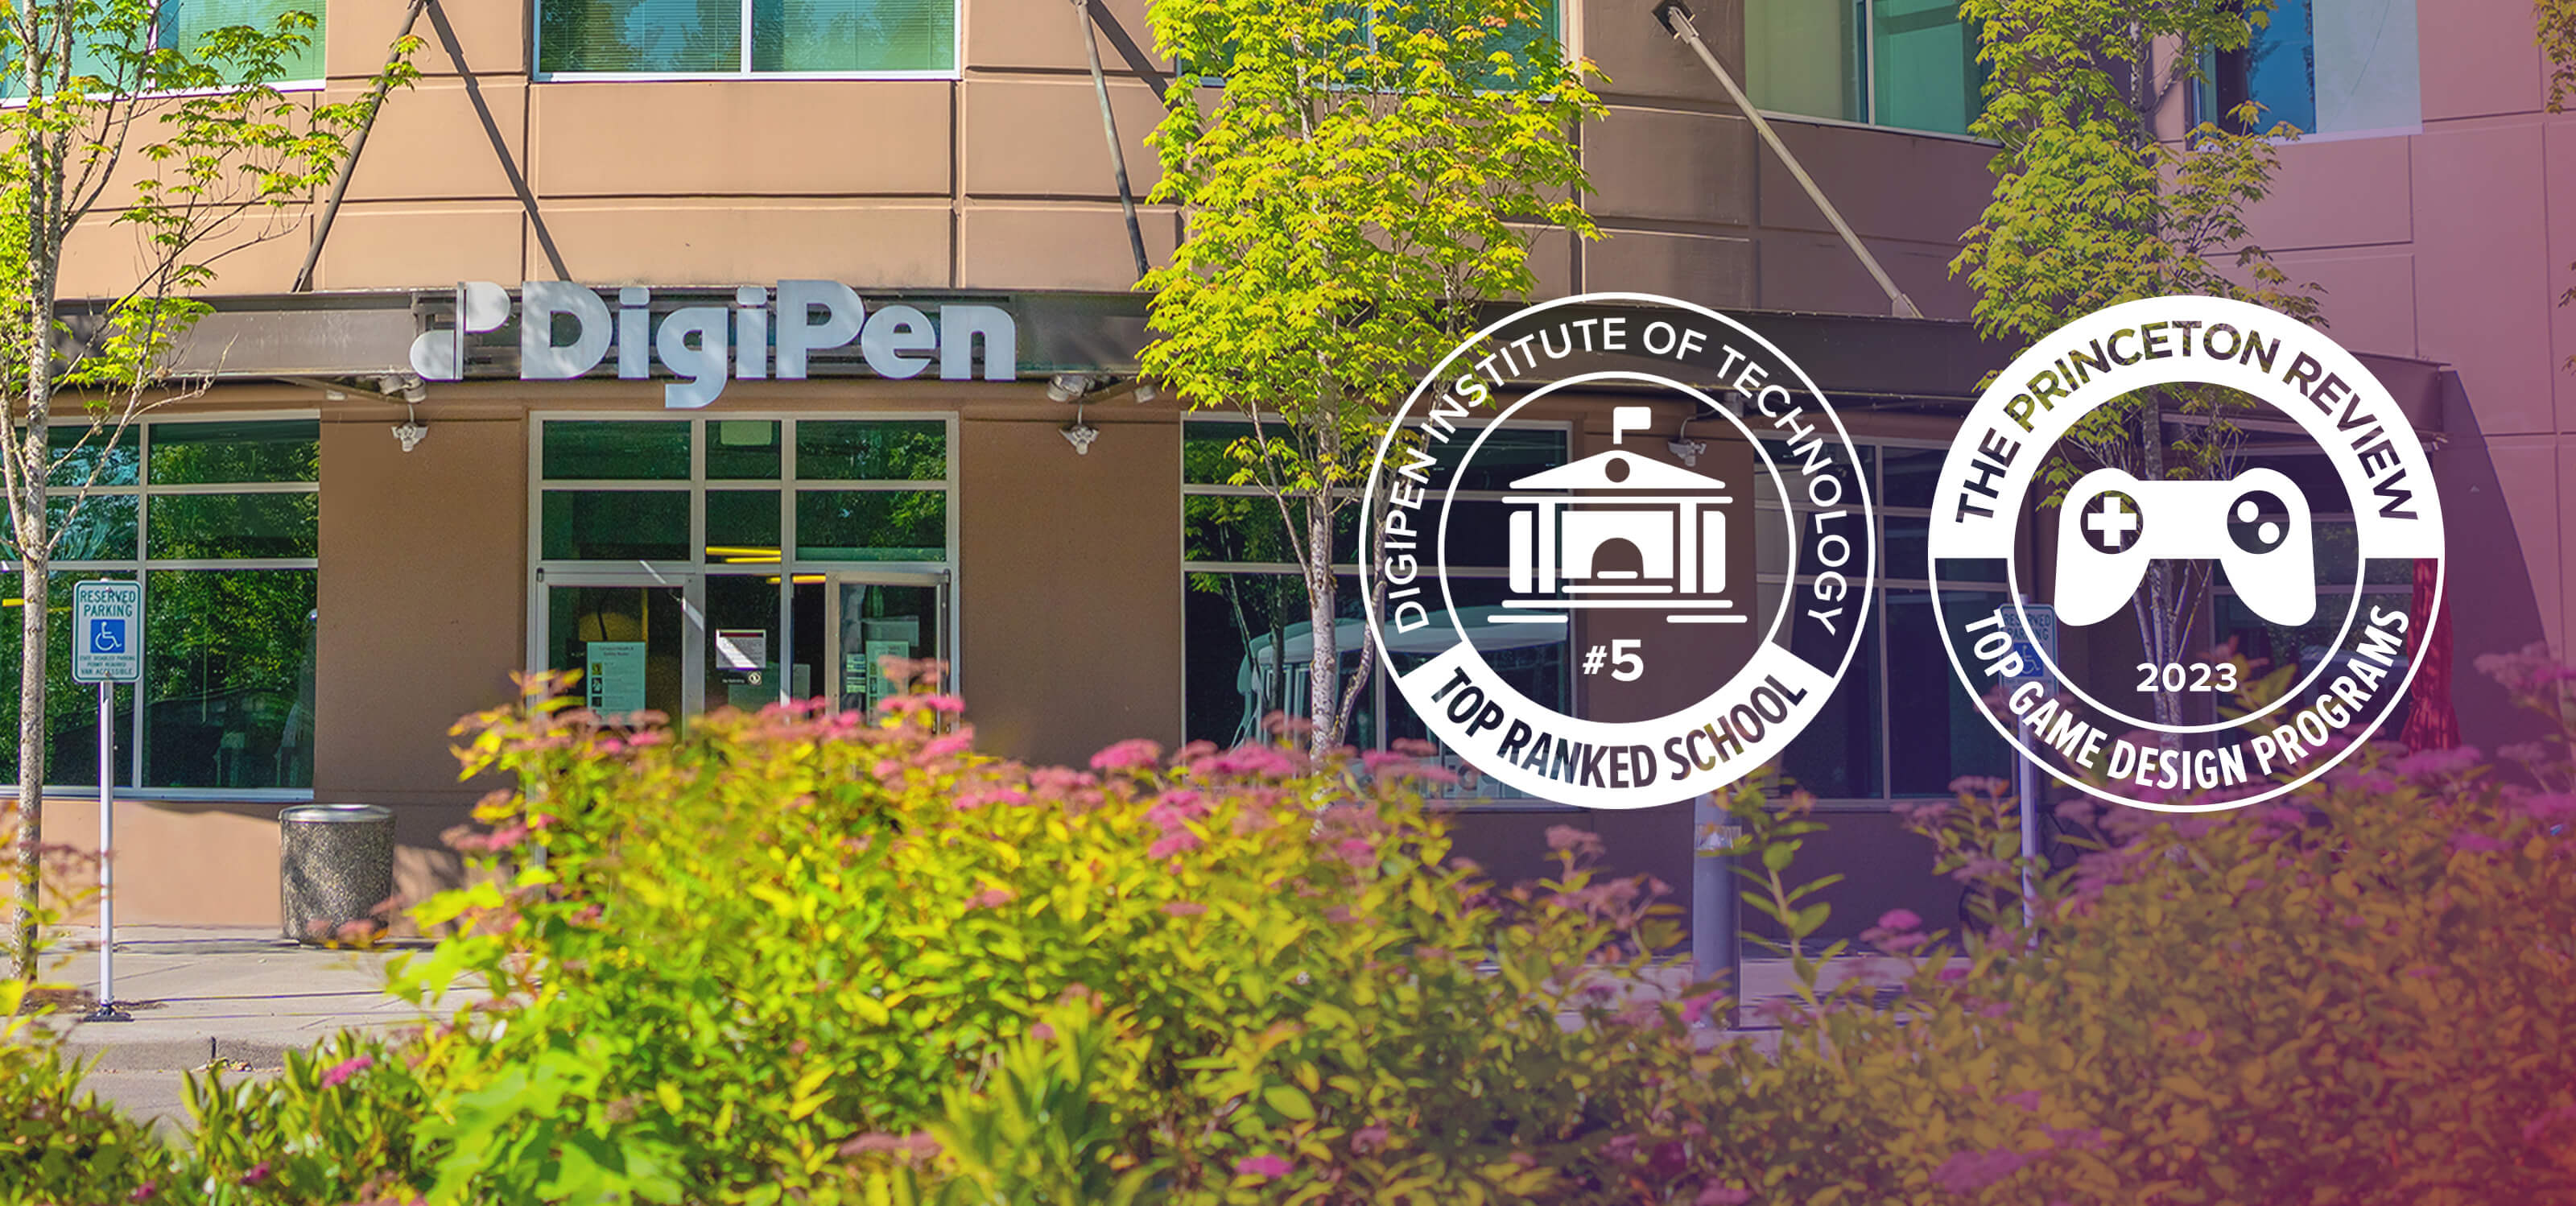 Two Princeton Review official award seals imposed over the DigiPen Redmond campus.